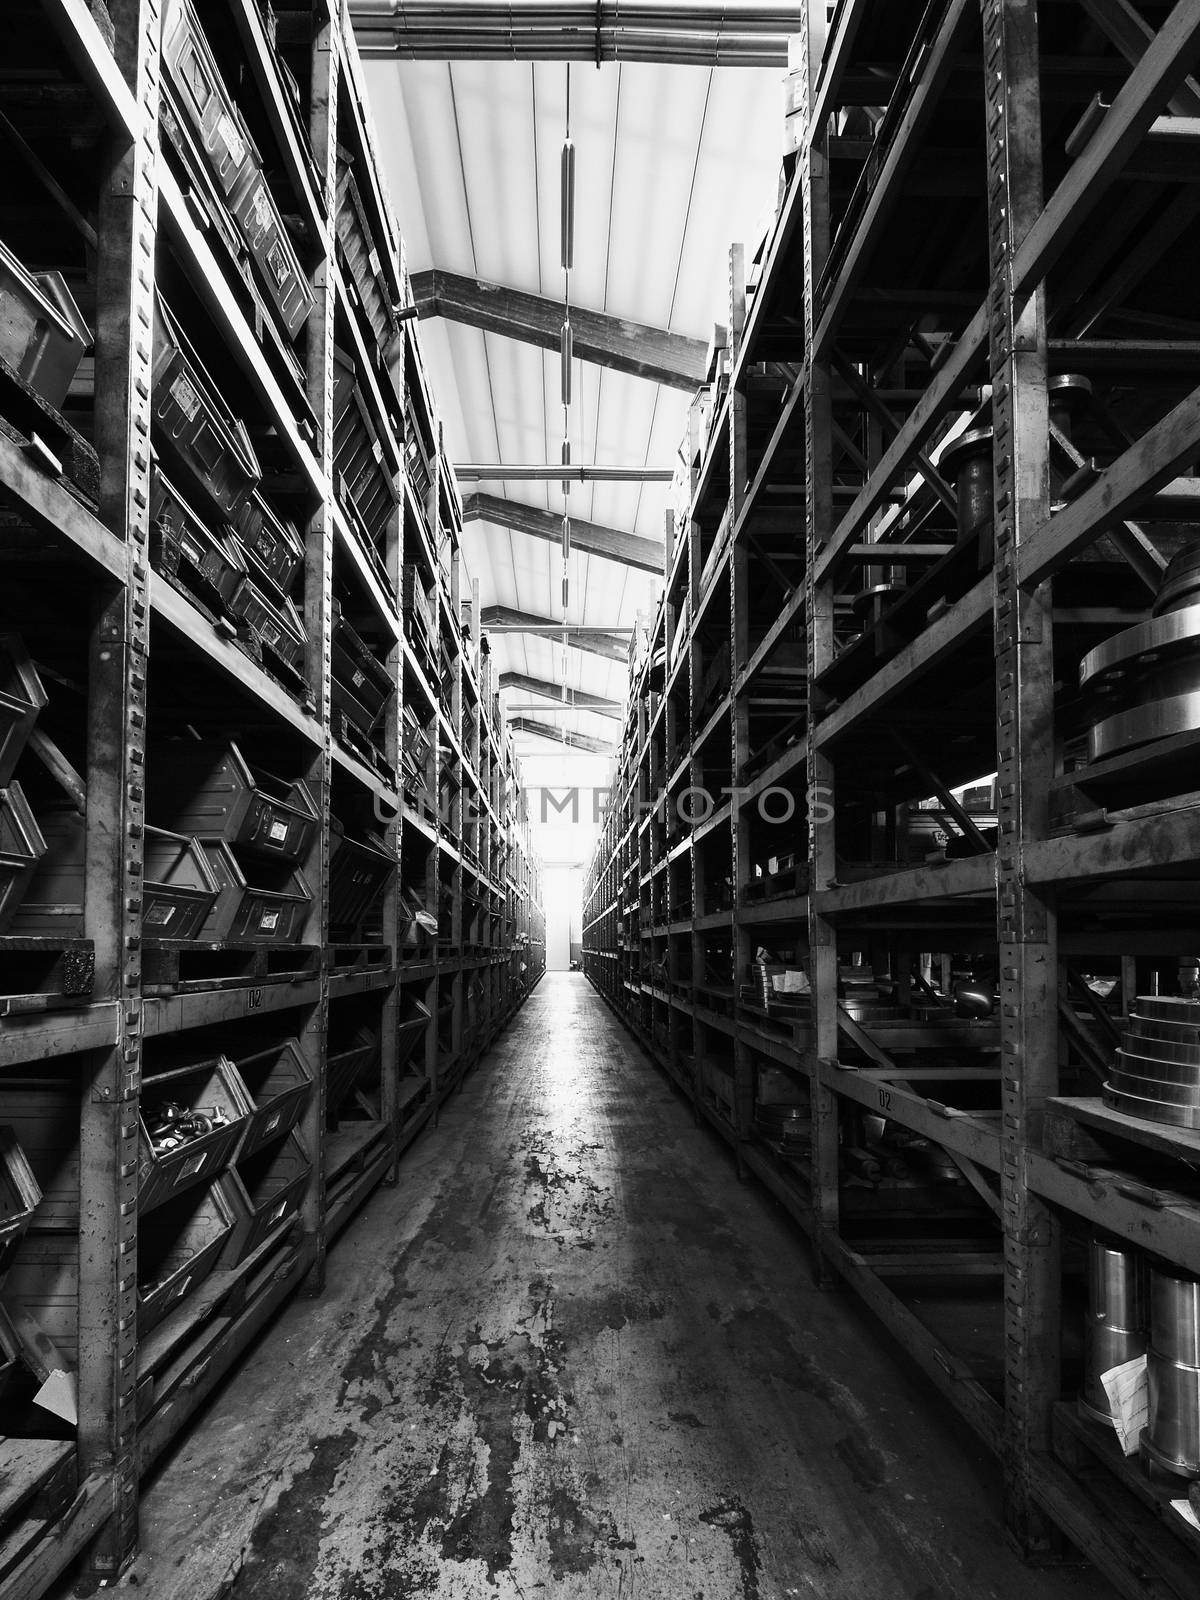 Warehouse shelves with tools by ClaudioArnese